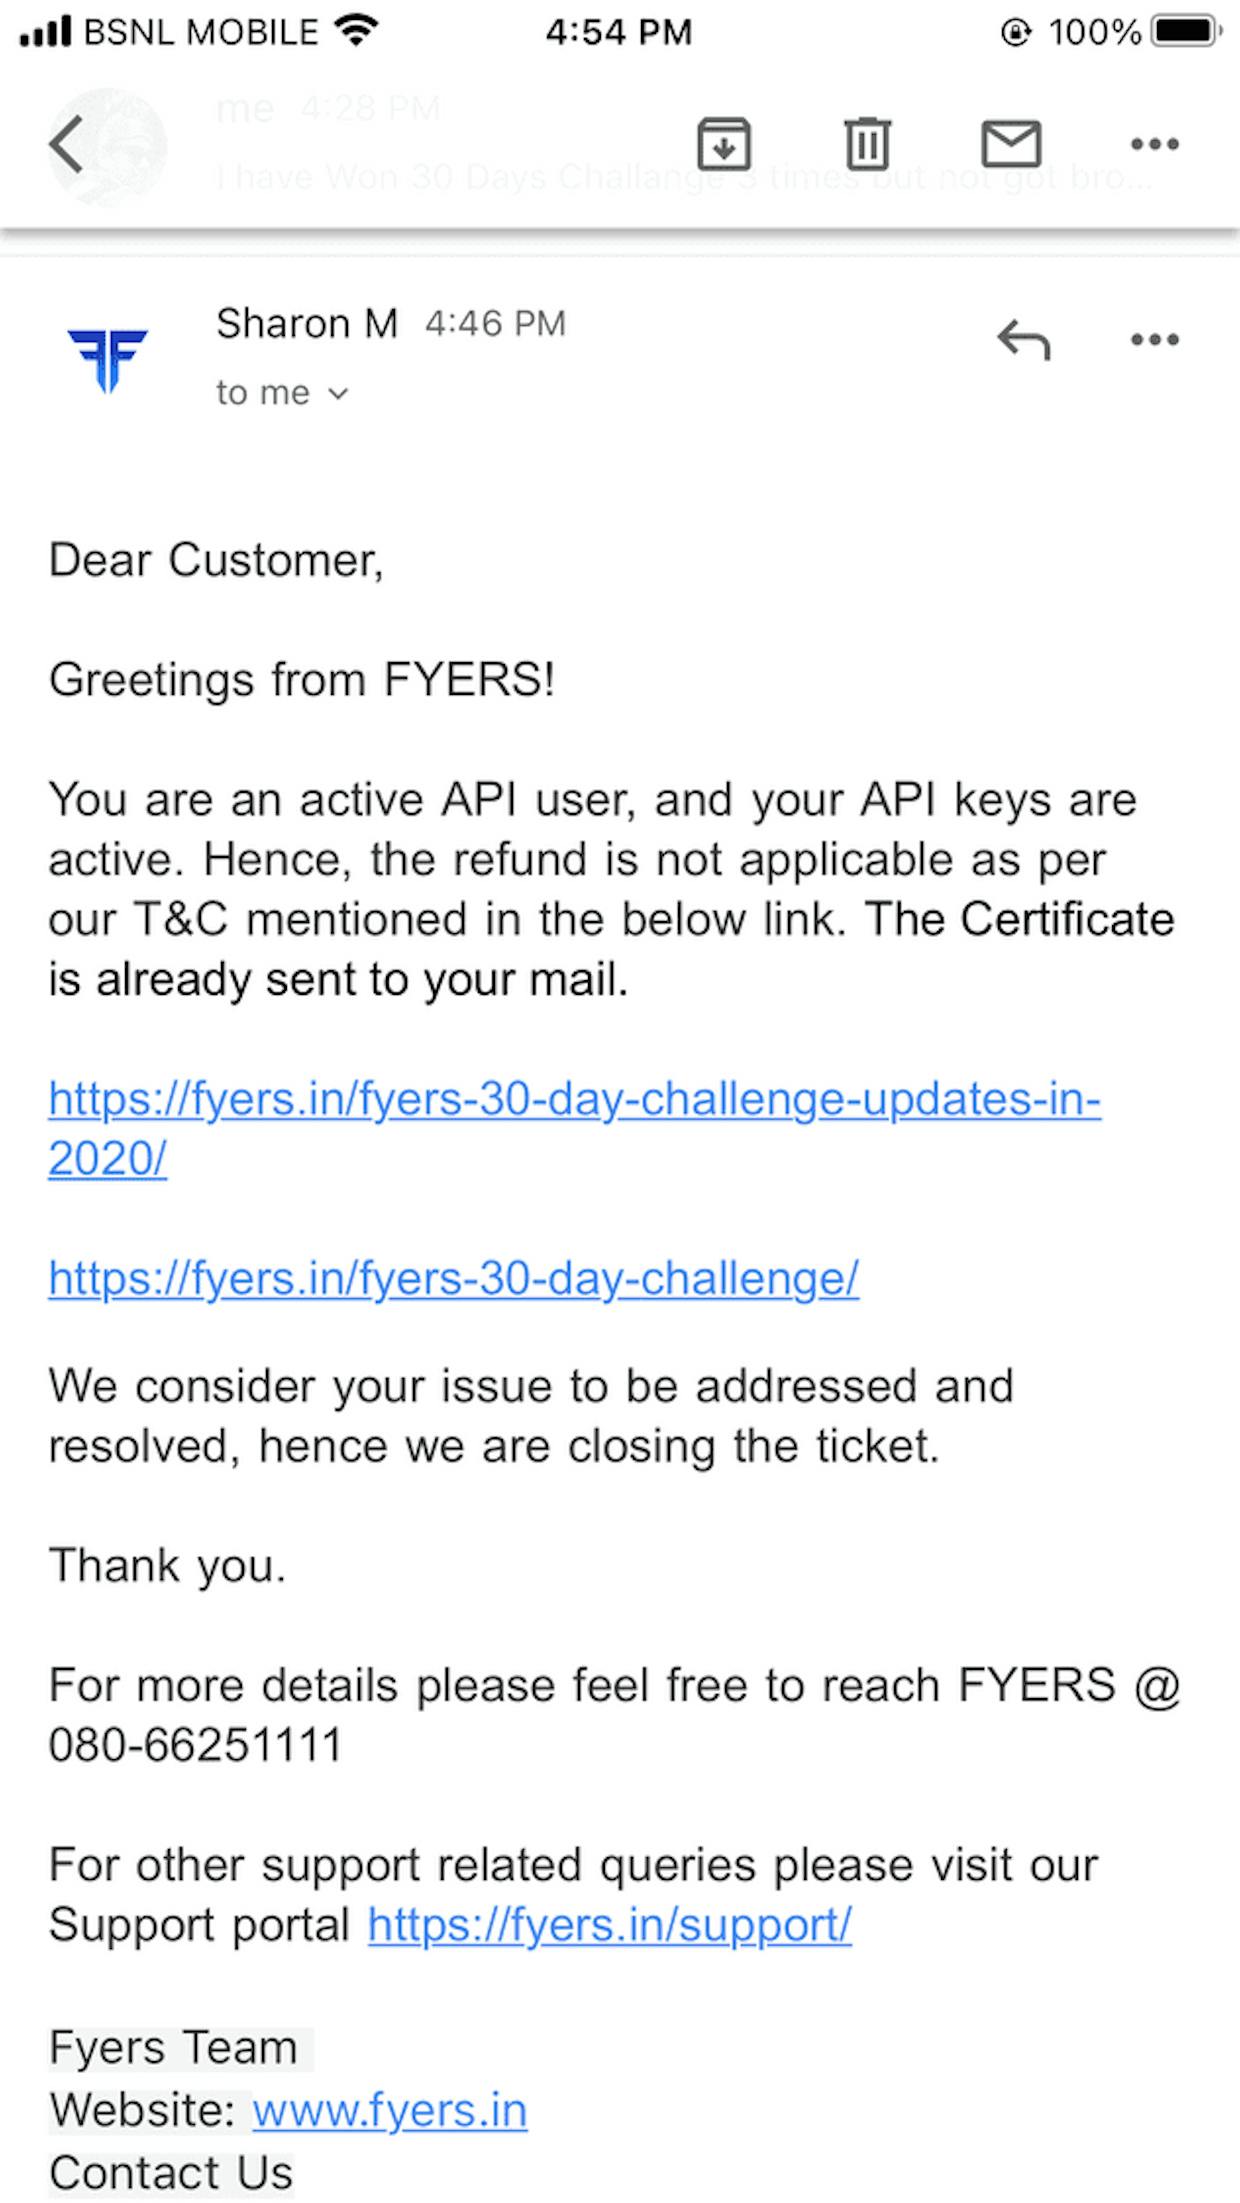 I was not active api user in dec 2020 when  i won 30 days challenge. They said active api user can’t get brokerage refund. never seen such t&c in my life.